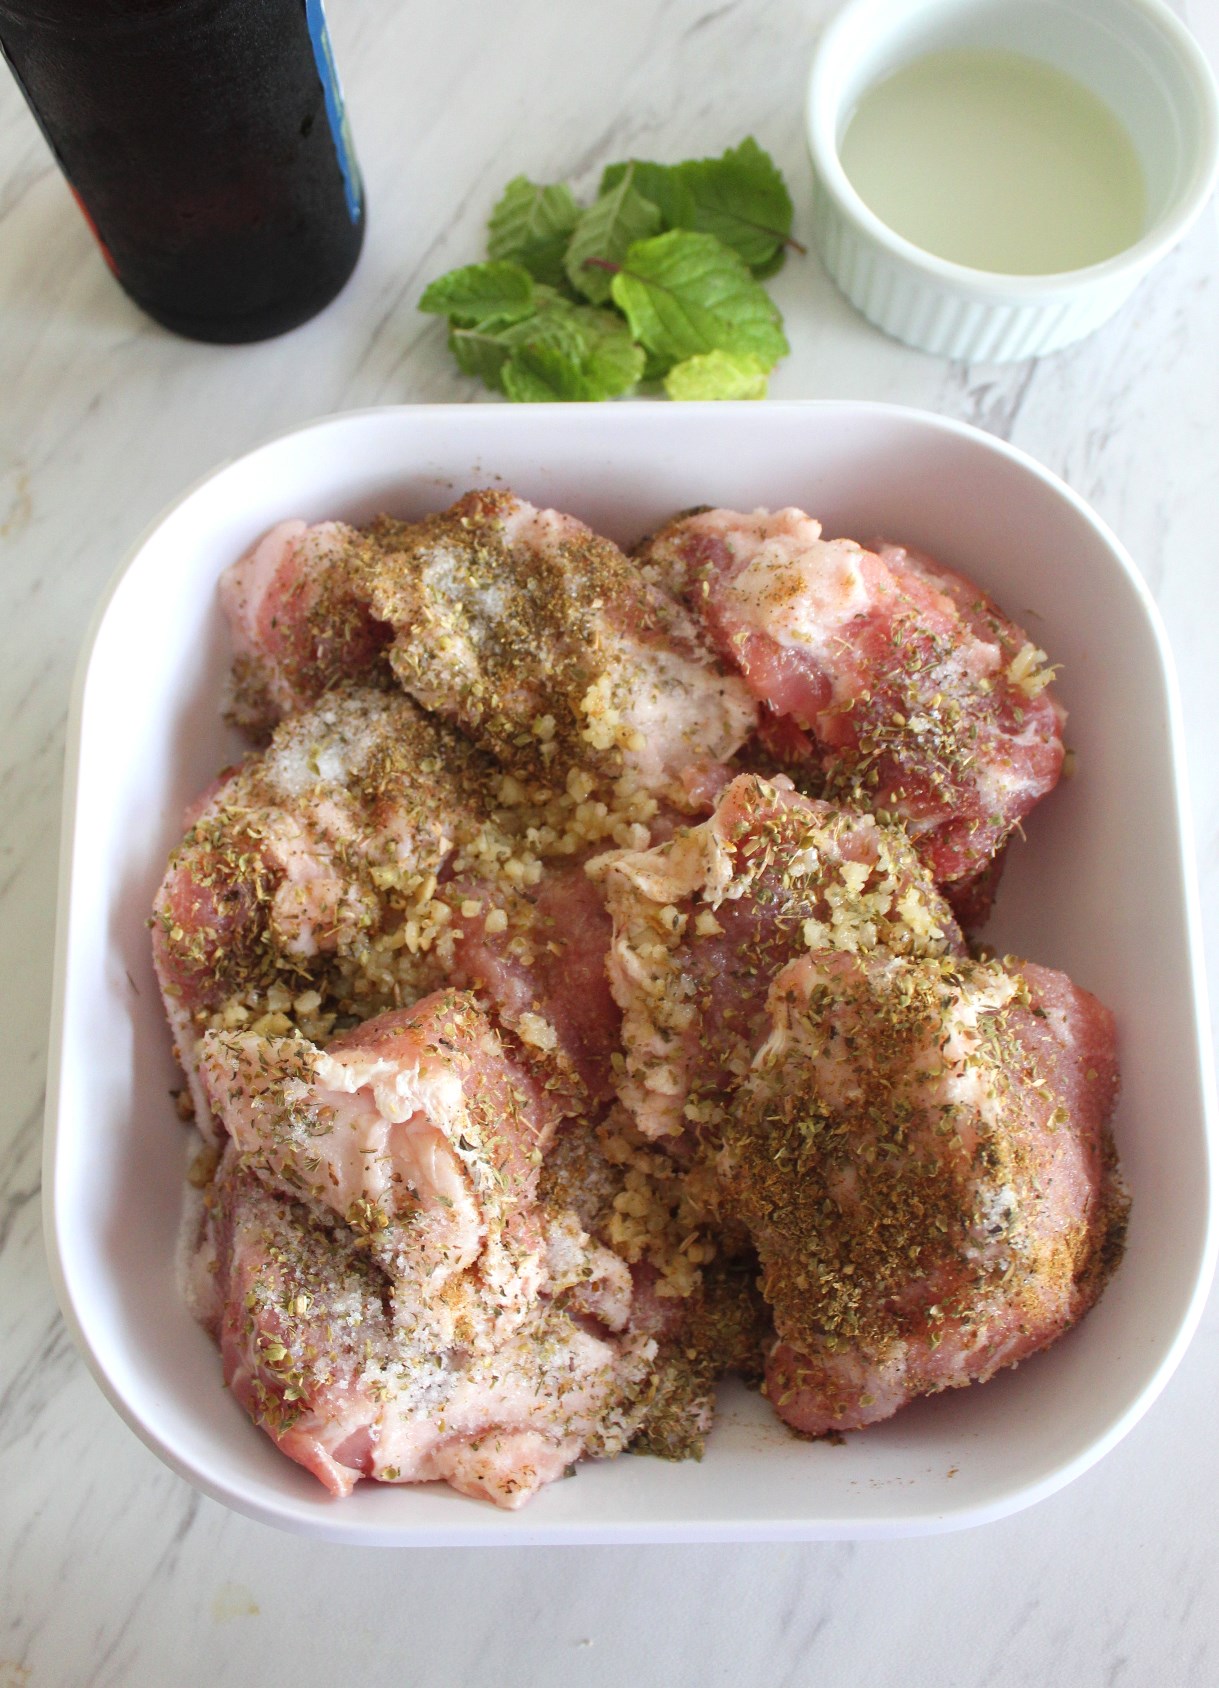 Seasoned pork meat on a wide, square bowl shown next to a beer bottle, mint and lemon juice.